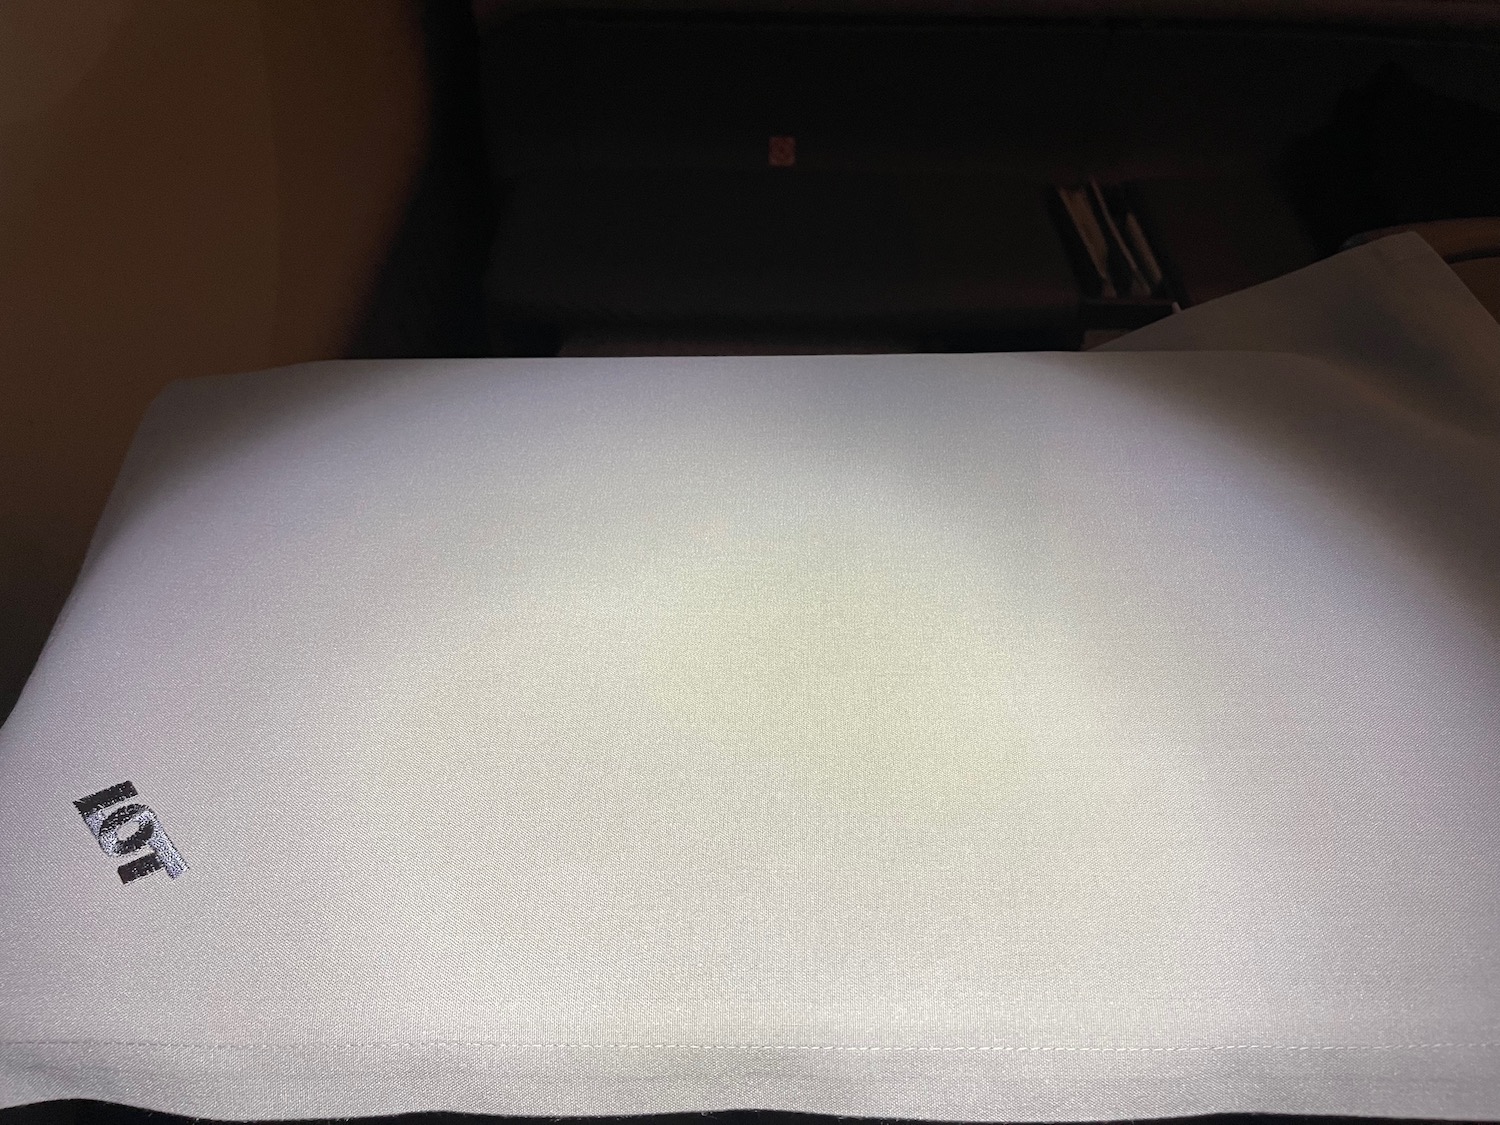 a white paper on a table